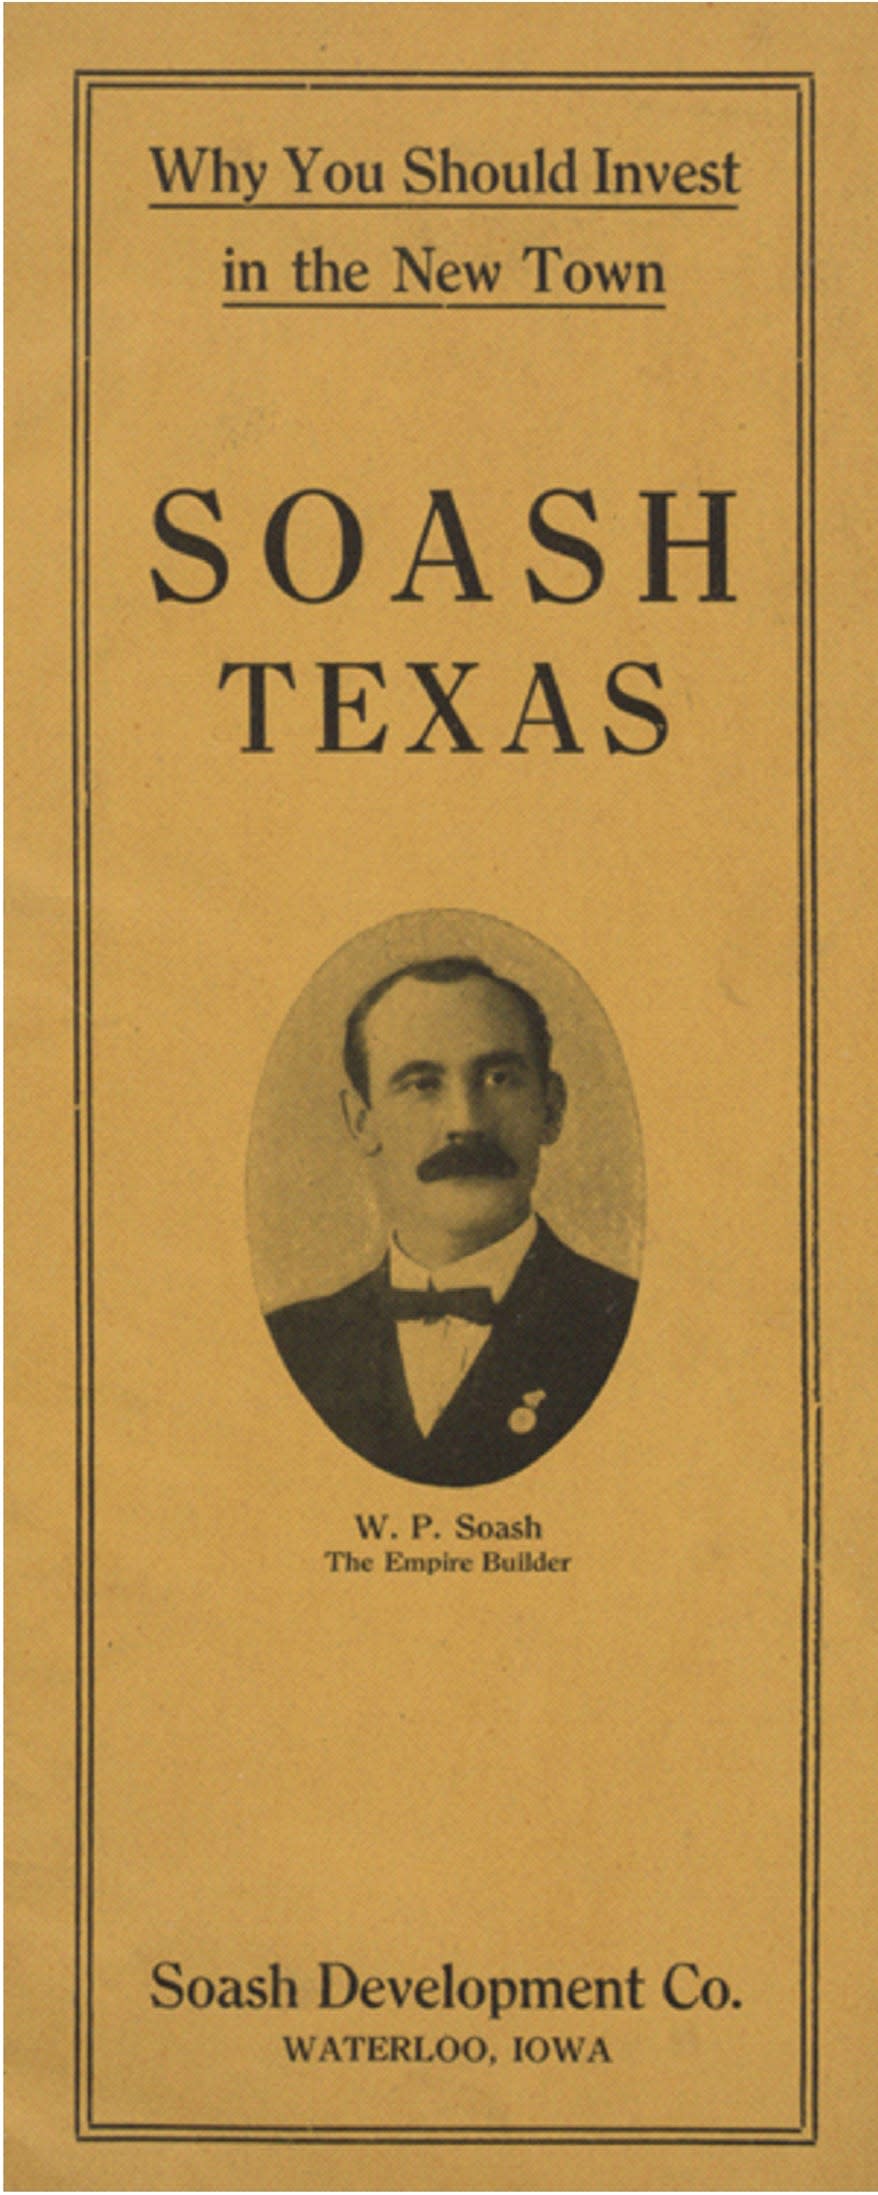 Land promoter W. P. Soash developed this brochure about 1910 to promote his town of Soash, which was located about 25 miles southeast of Lamesa. The severe three-year drought which began that year ruined his development.